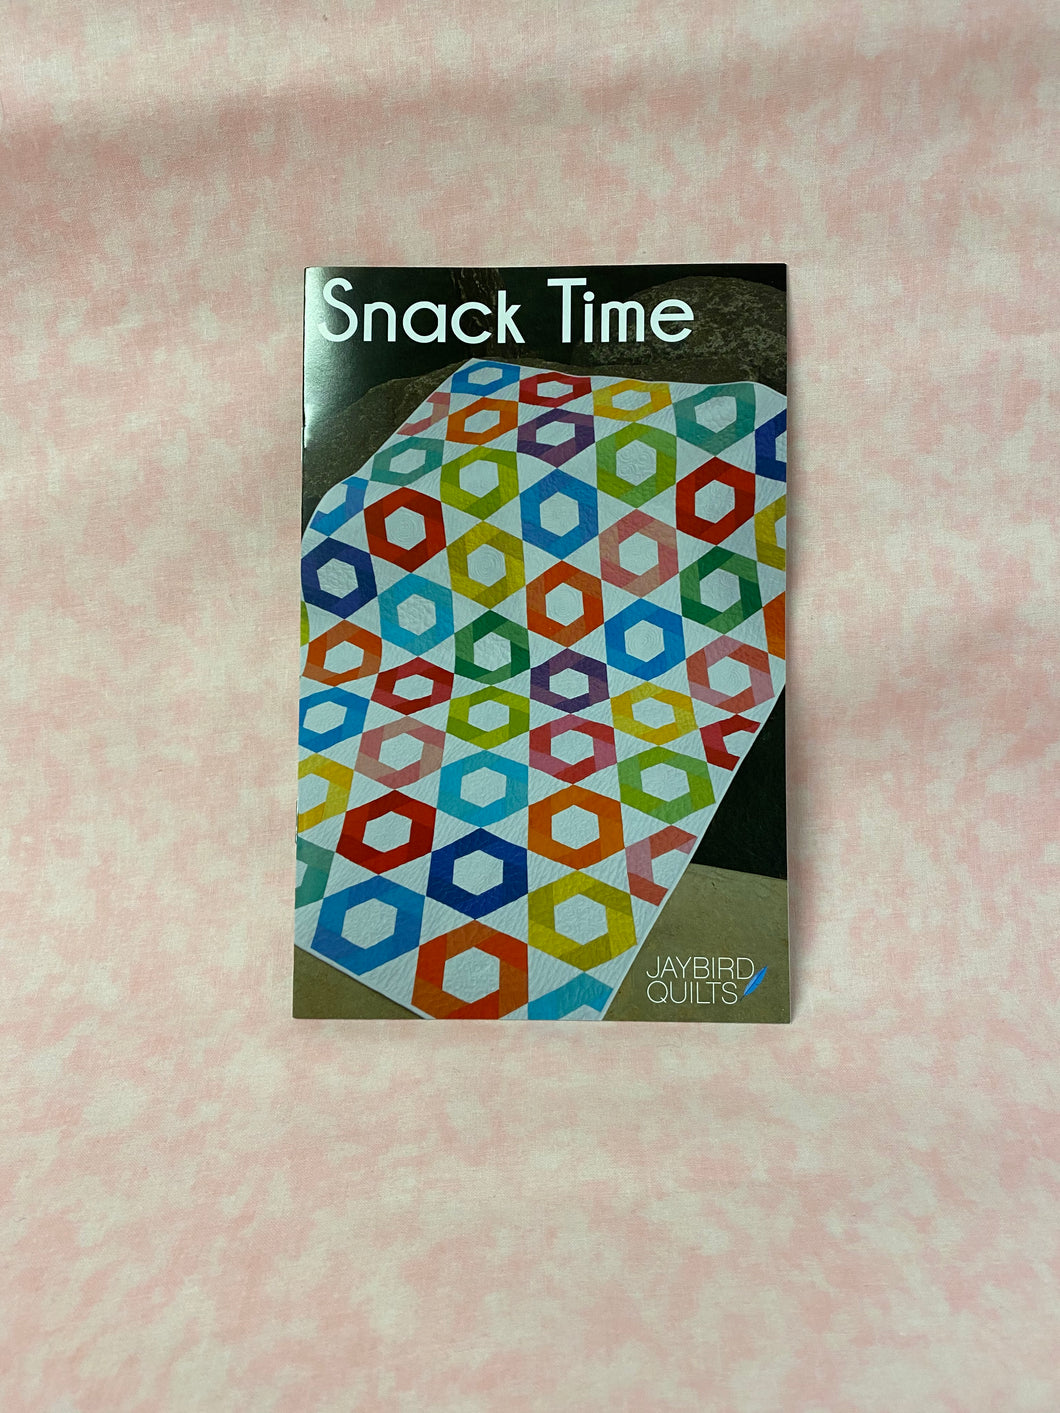 Jaybird Quilts Snack Time p29